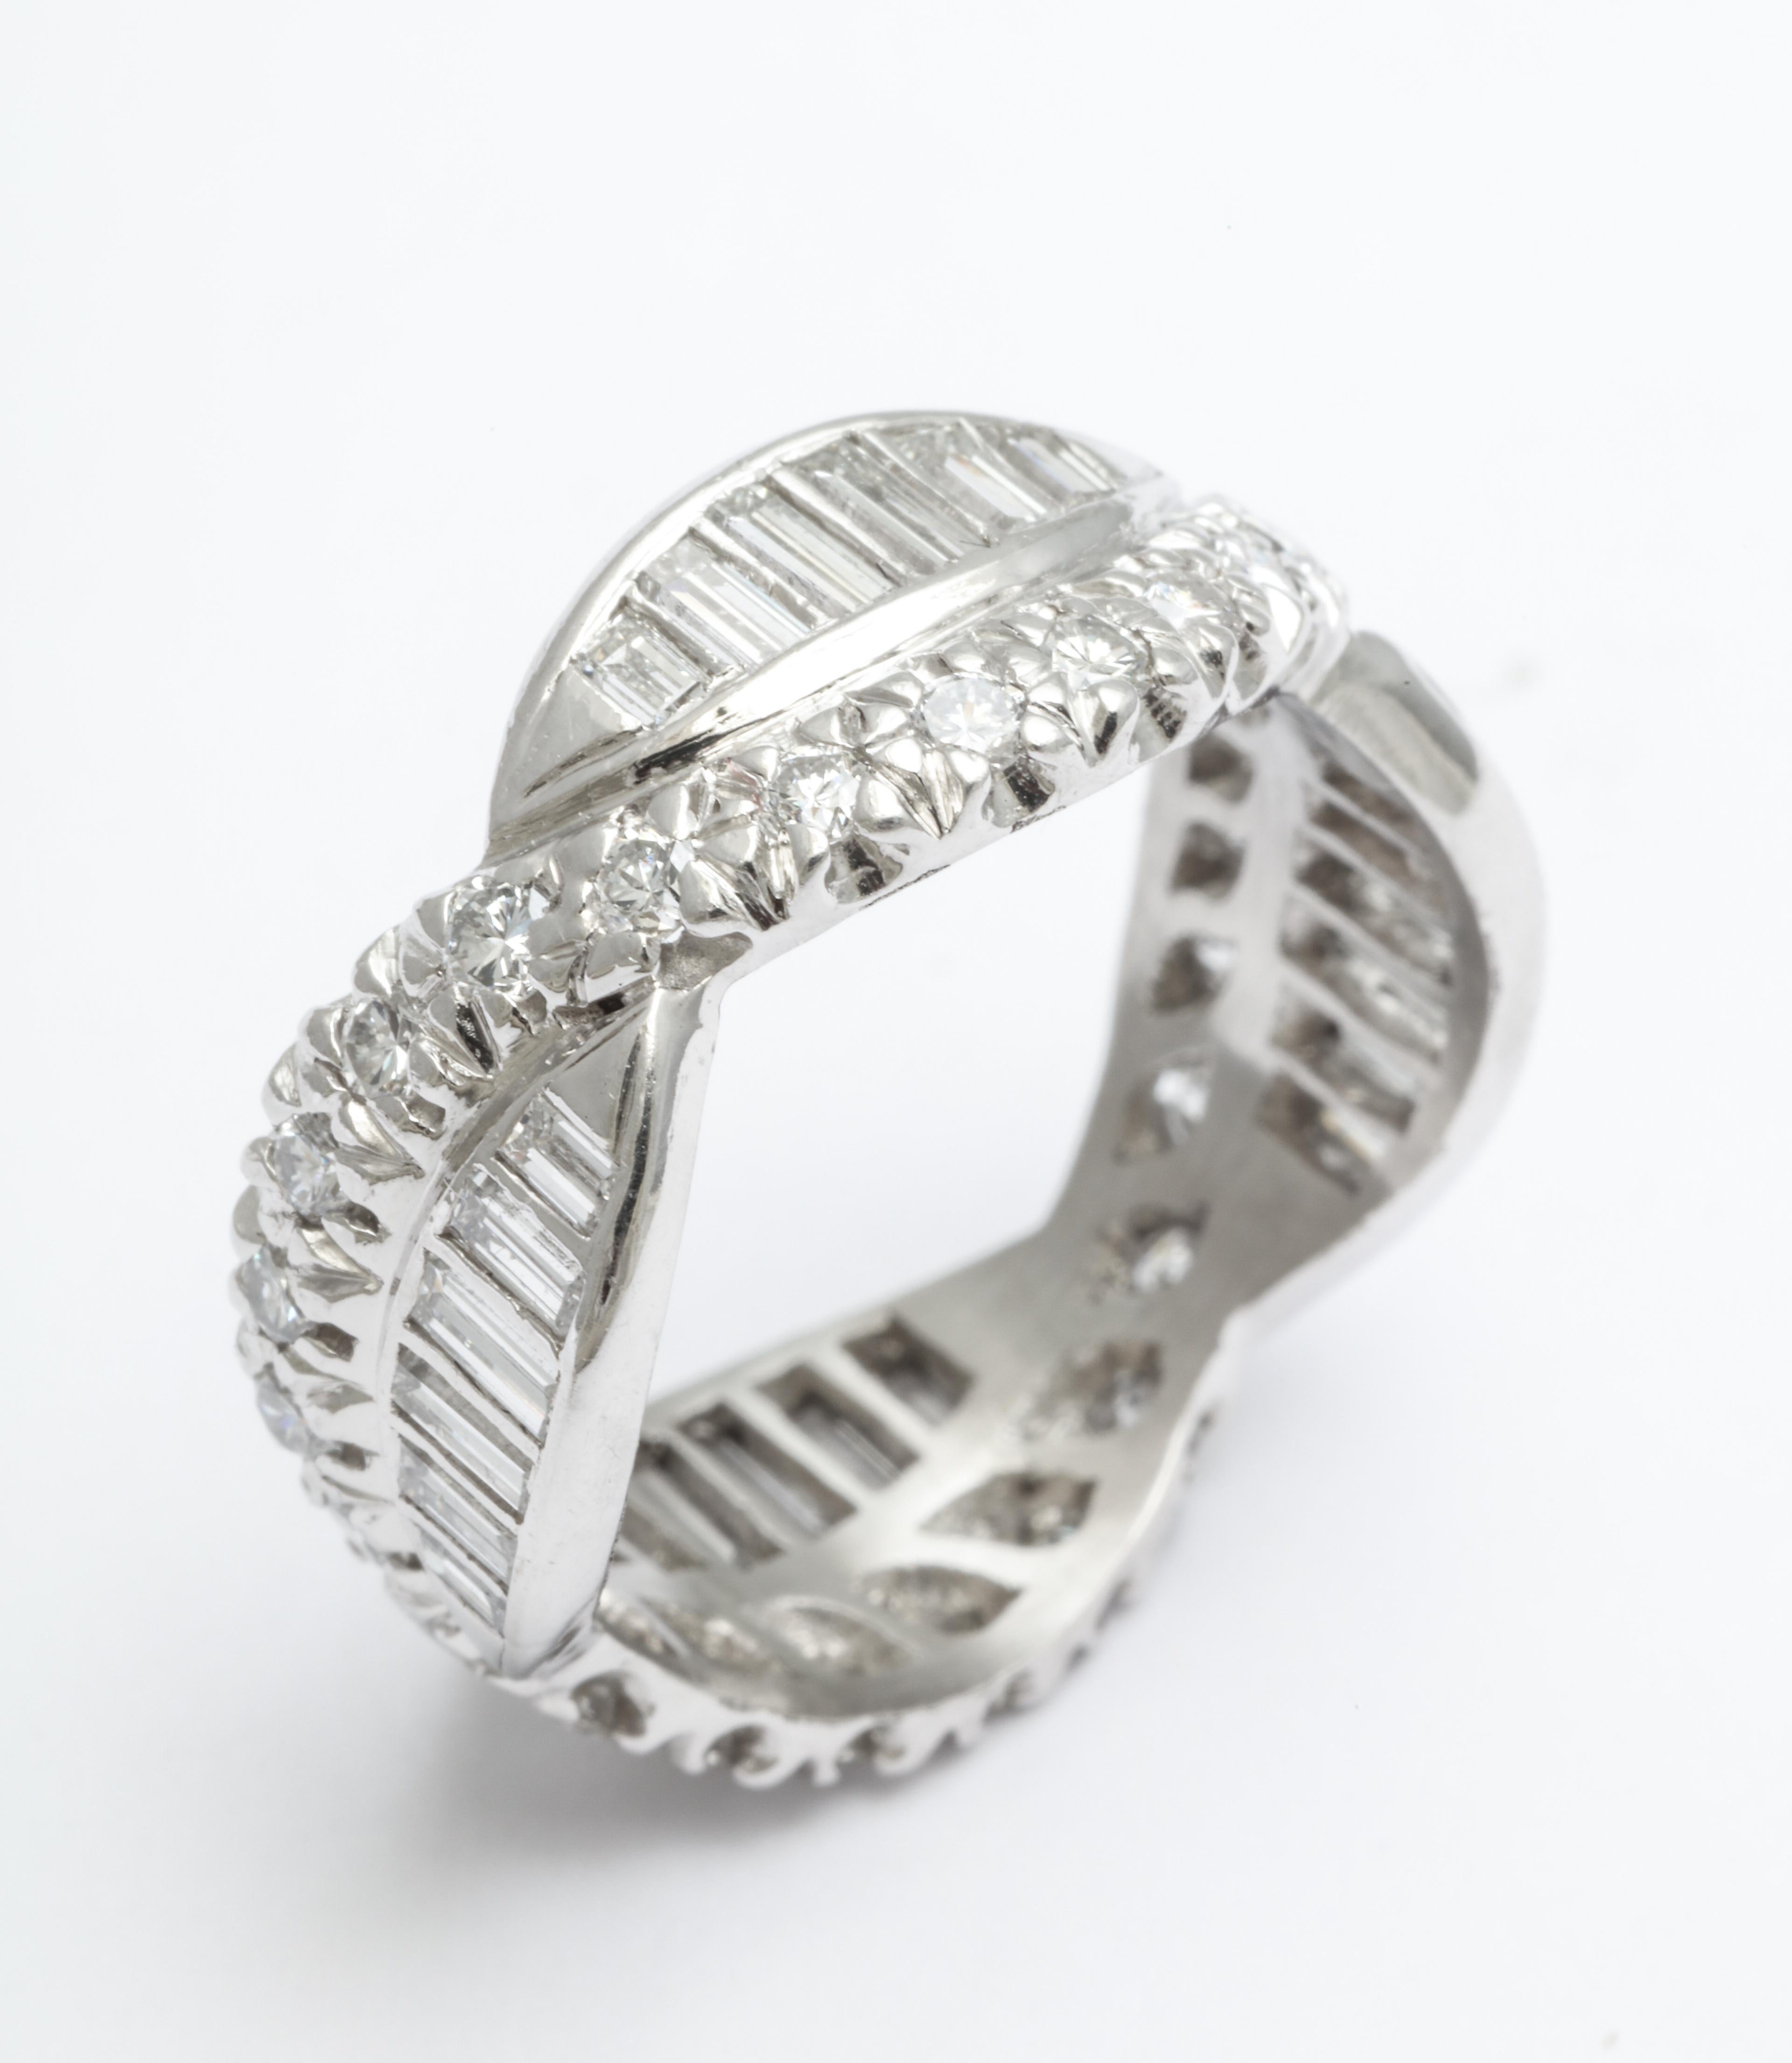 An elegant period Art Deco eternity band woven form with diamond baguettes and chips set in platinum. Measures: Its ring size is 5 3/4.